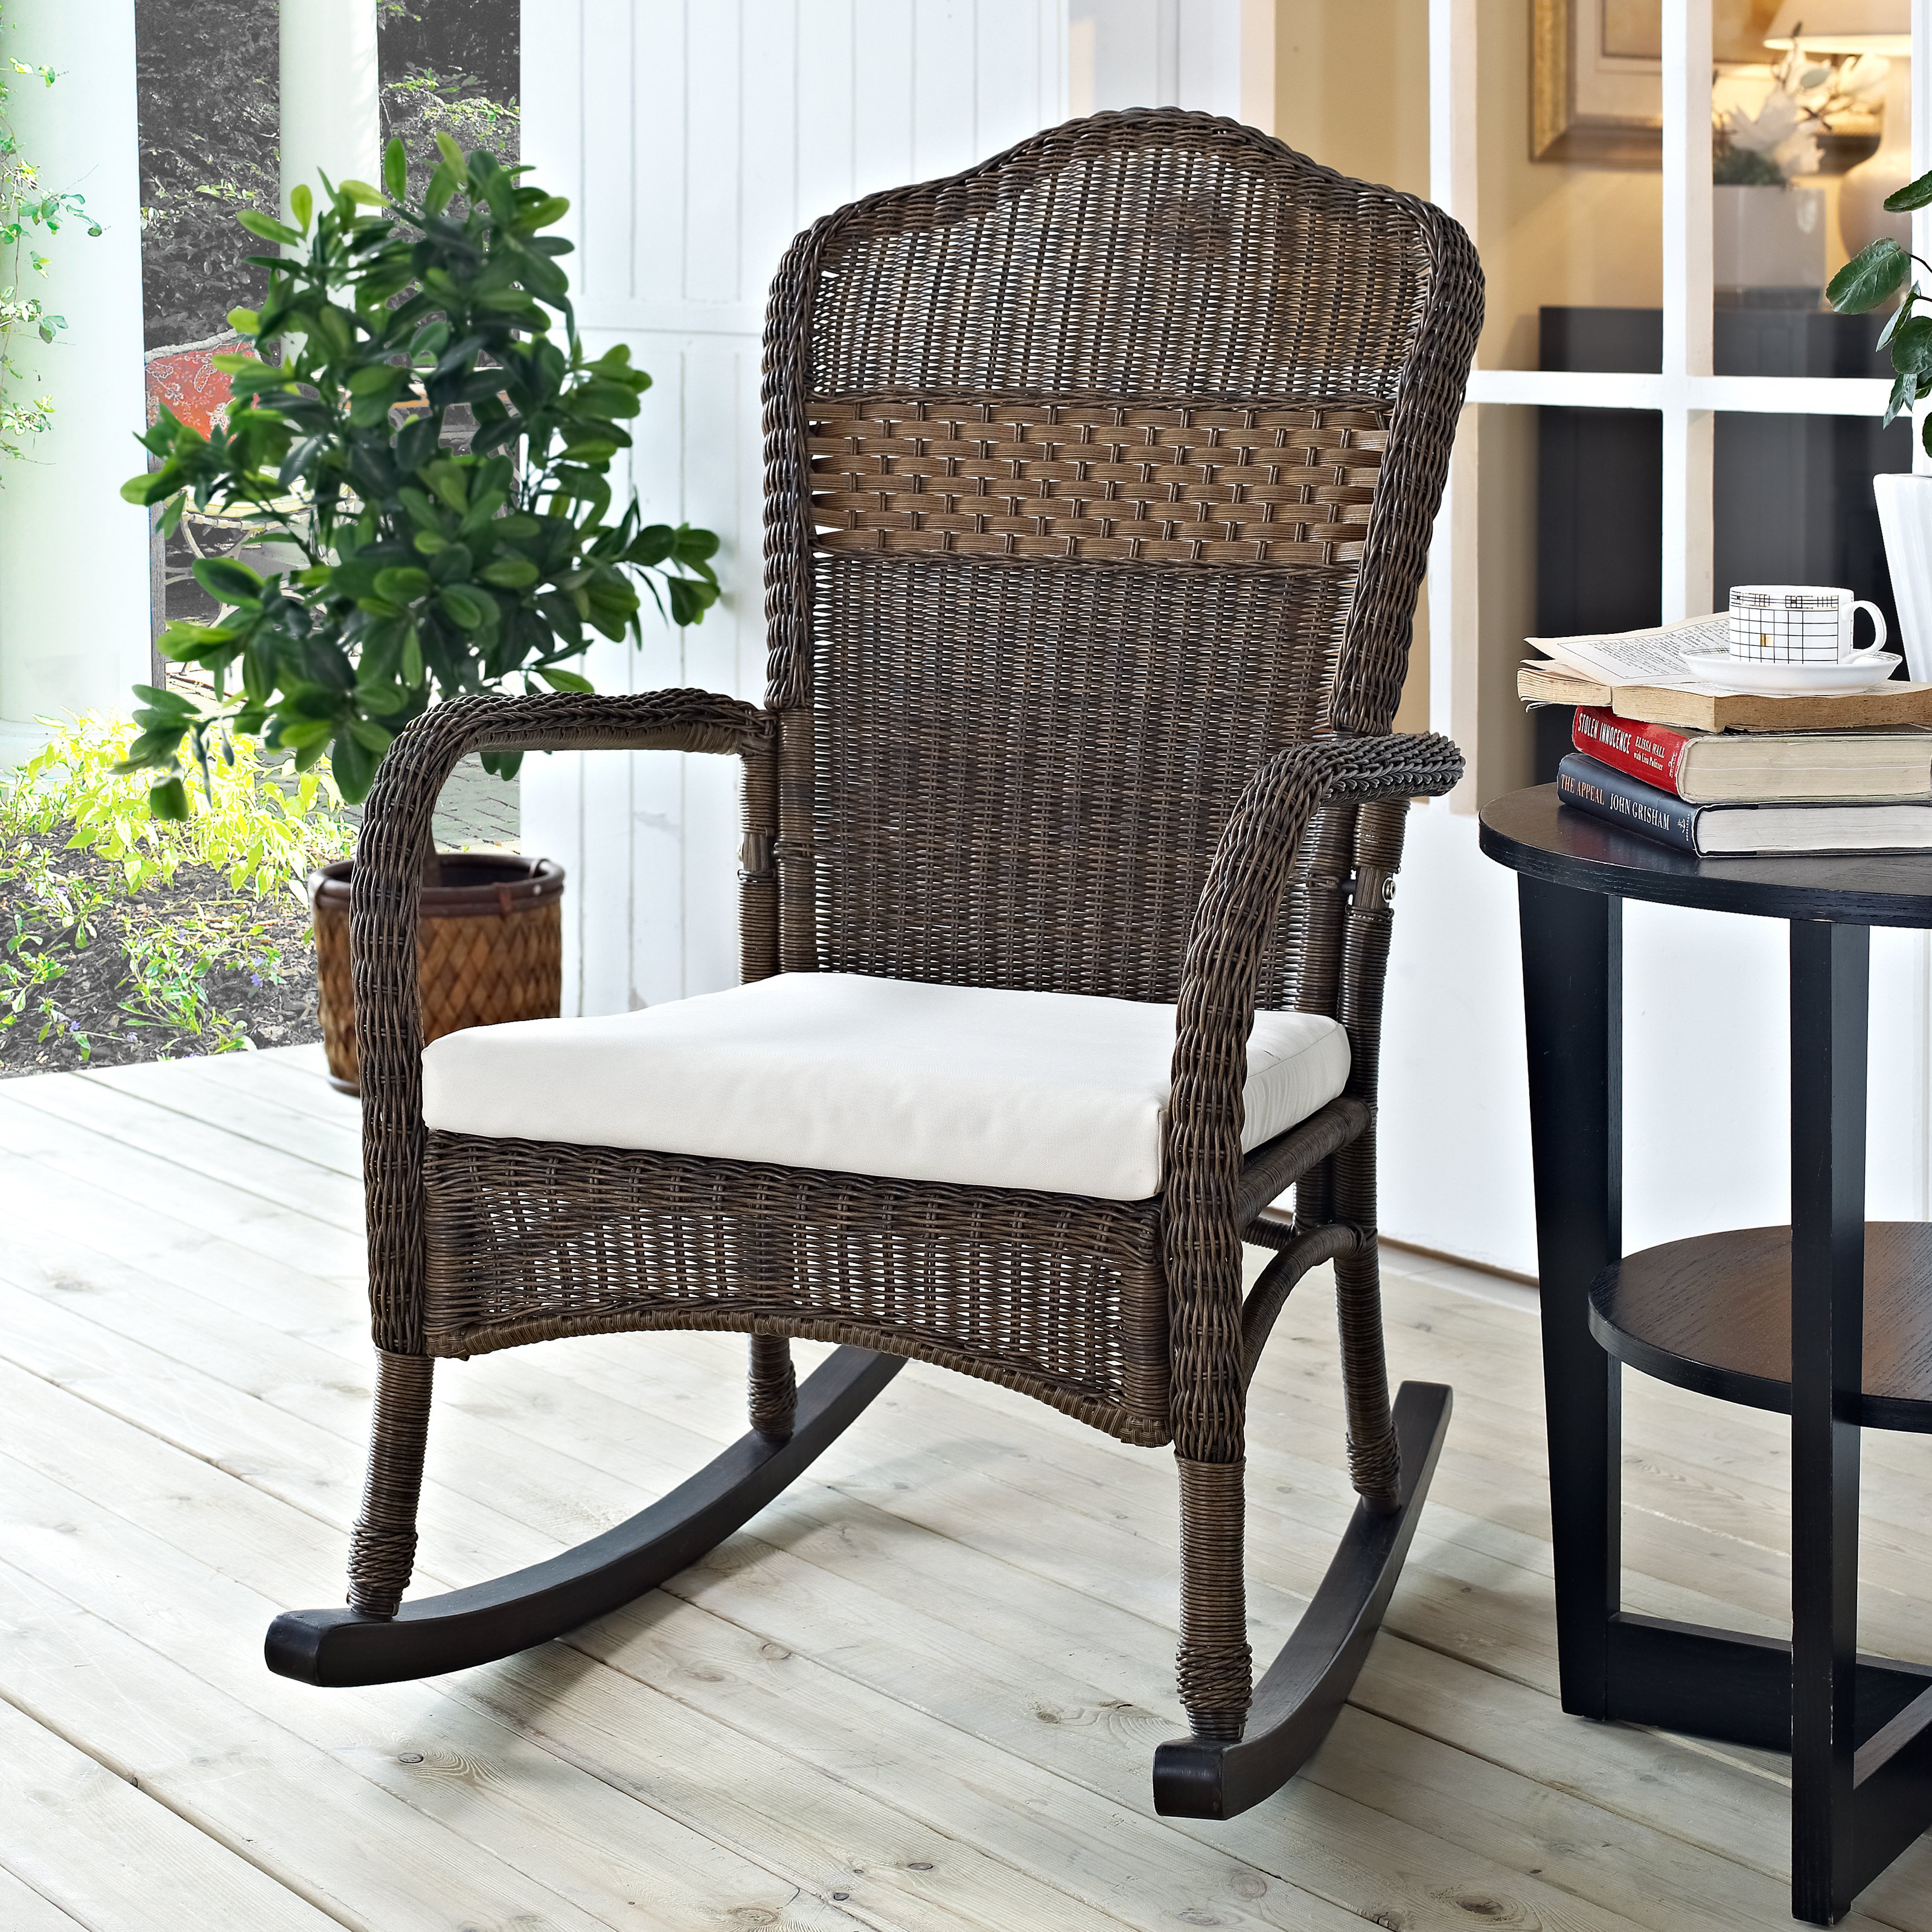 Importance of outdoor rocking chairs